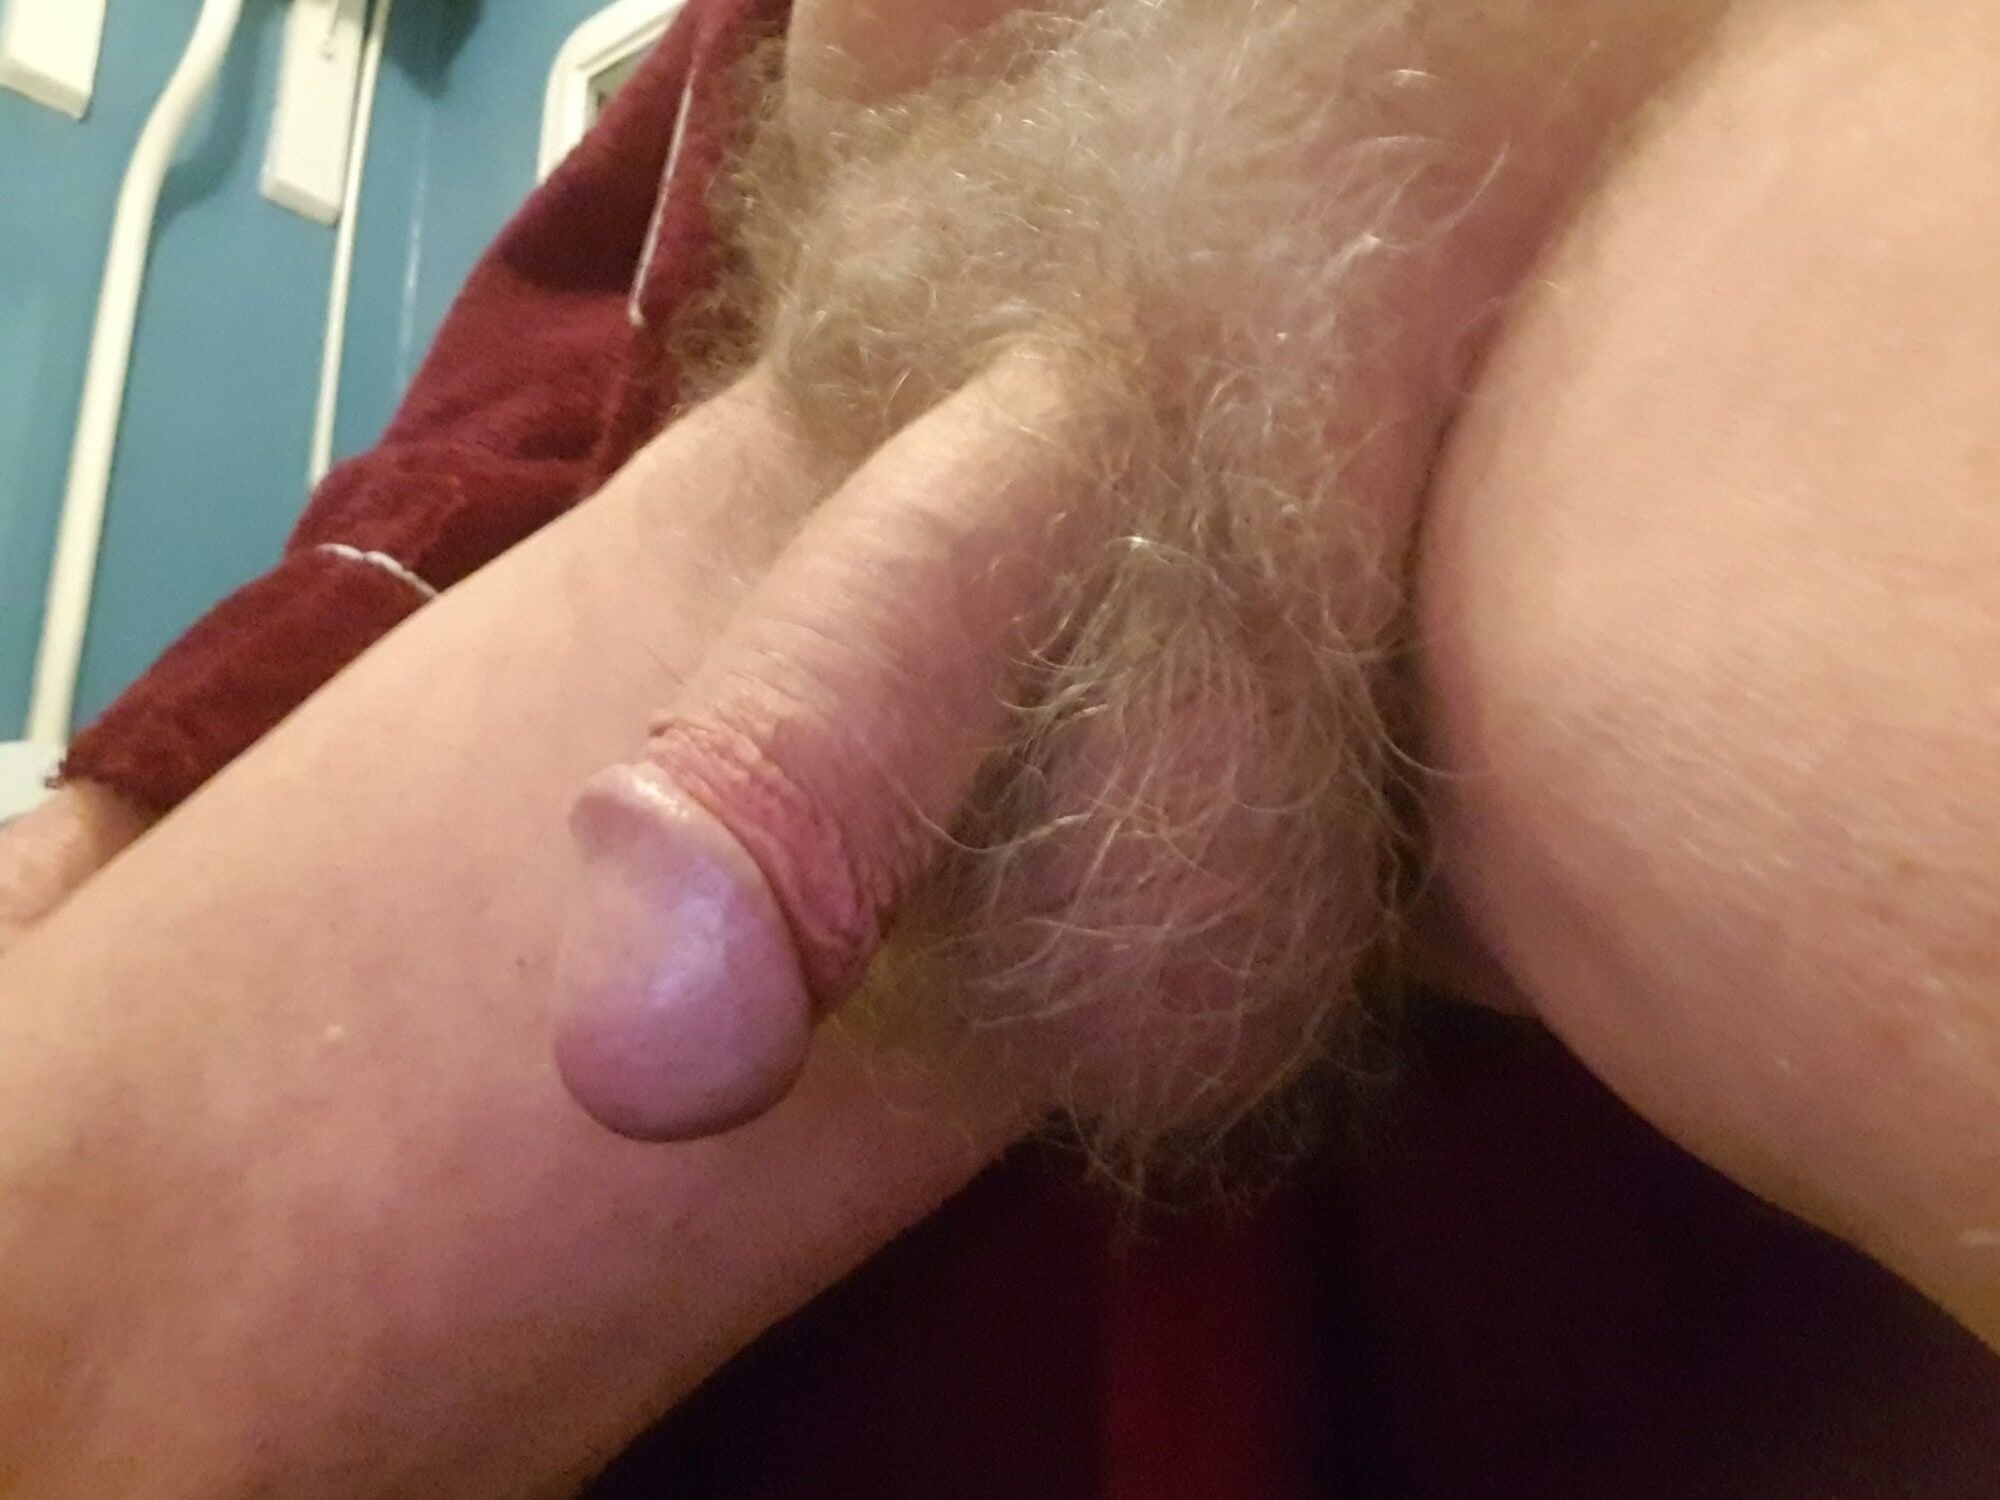 Just cock #2